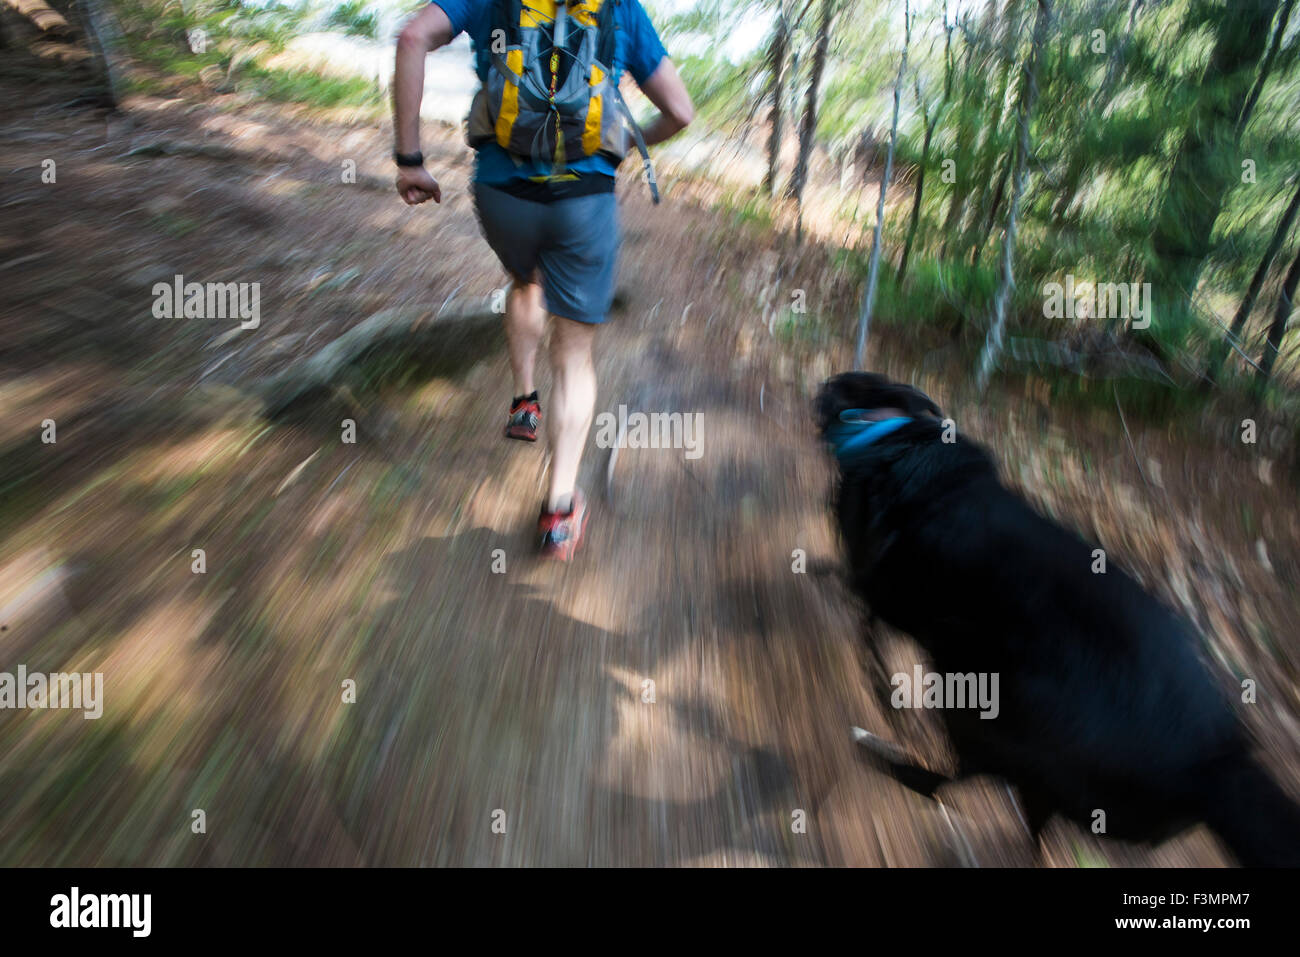 A fast pace run through the woods Stock Photo